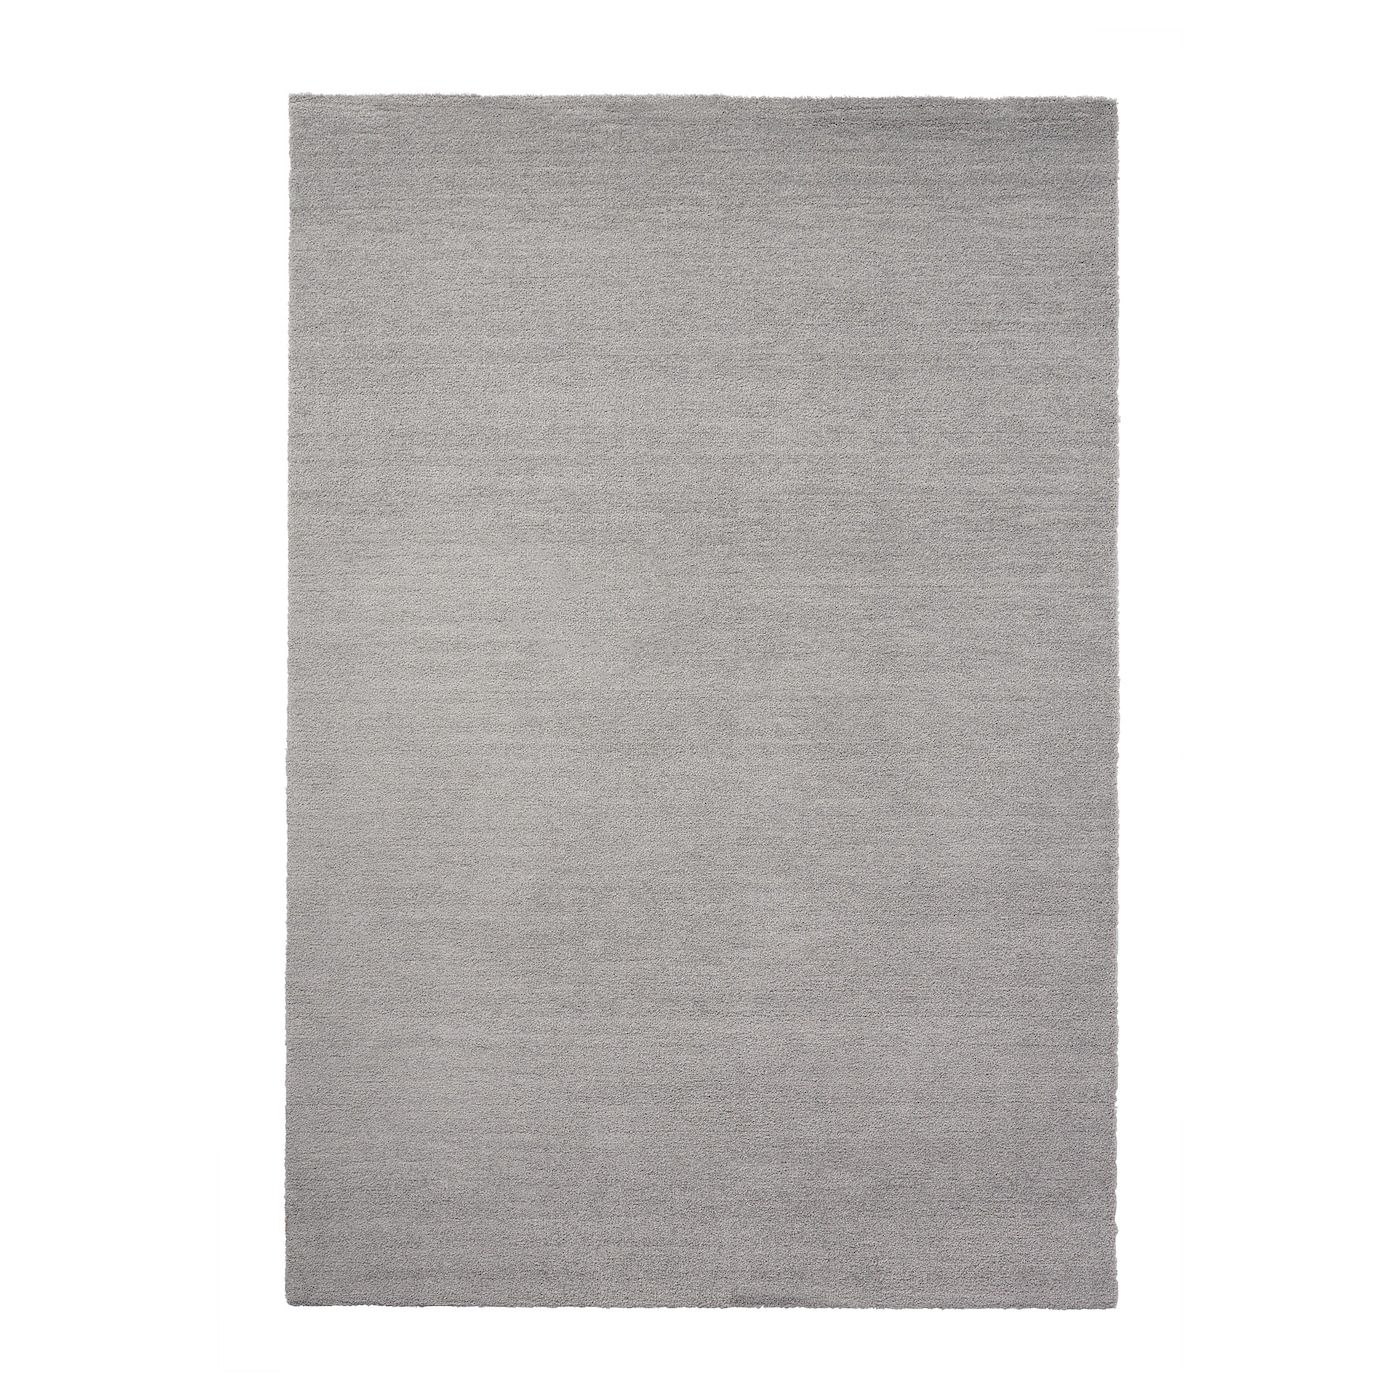 Knardrup Rug, Low Pile, Light Gray, 6'7"x9'10" – Ikea With Light Gray Rugs (View 8 of 15)